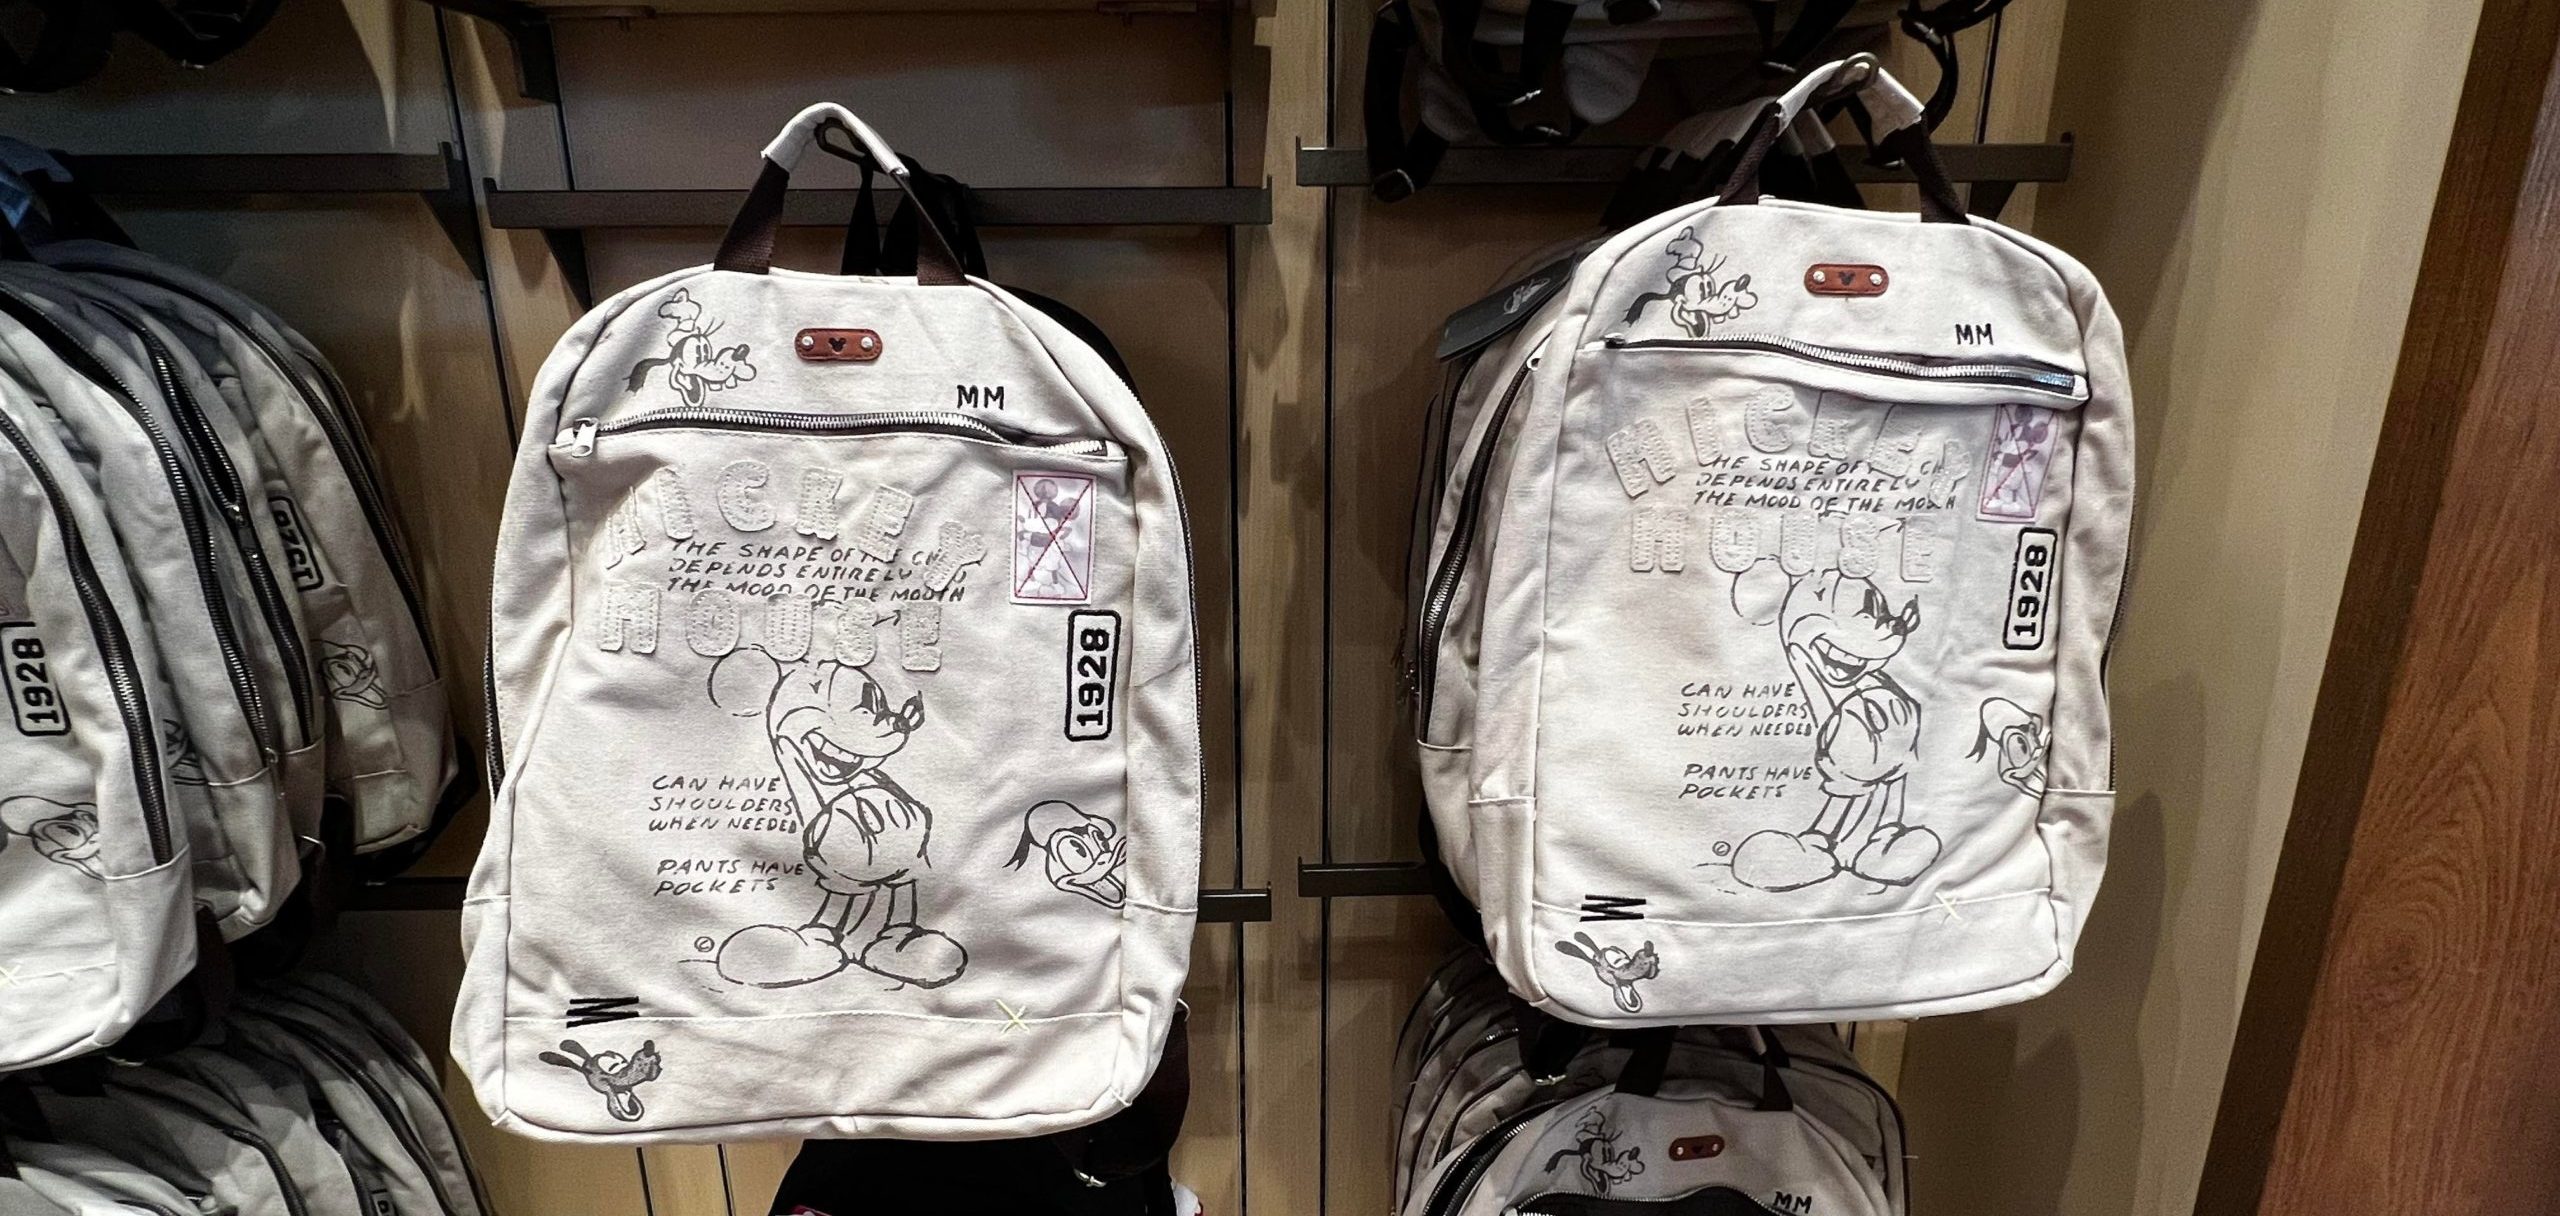 New Canvas Mickey Backpack Arrives at WOD - MickeyBlog.com